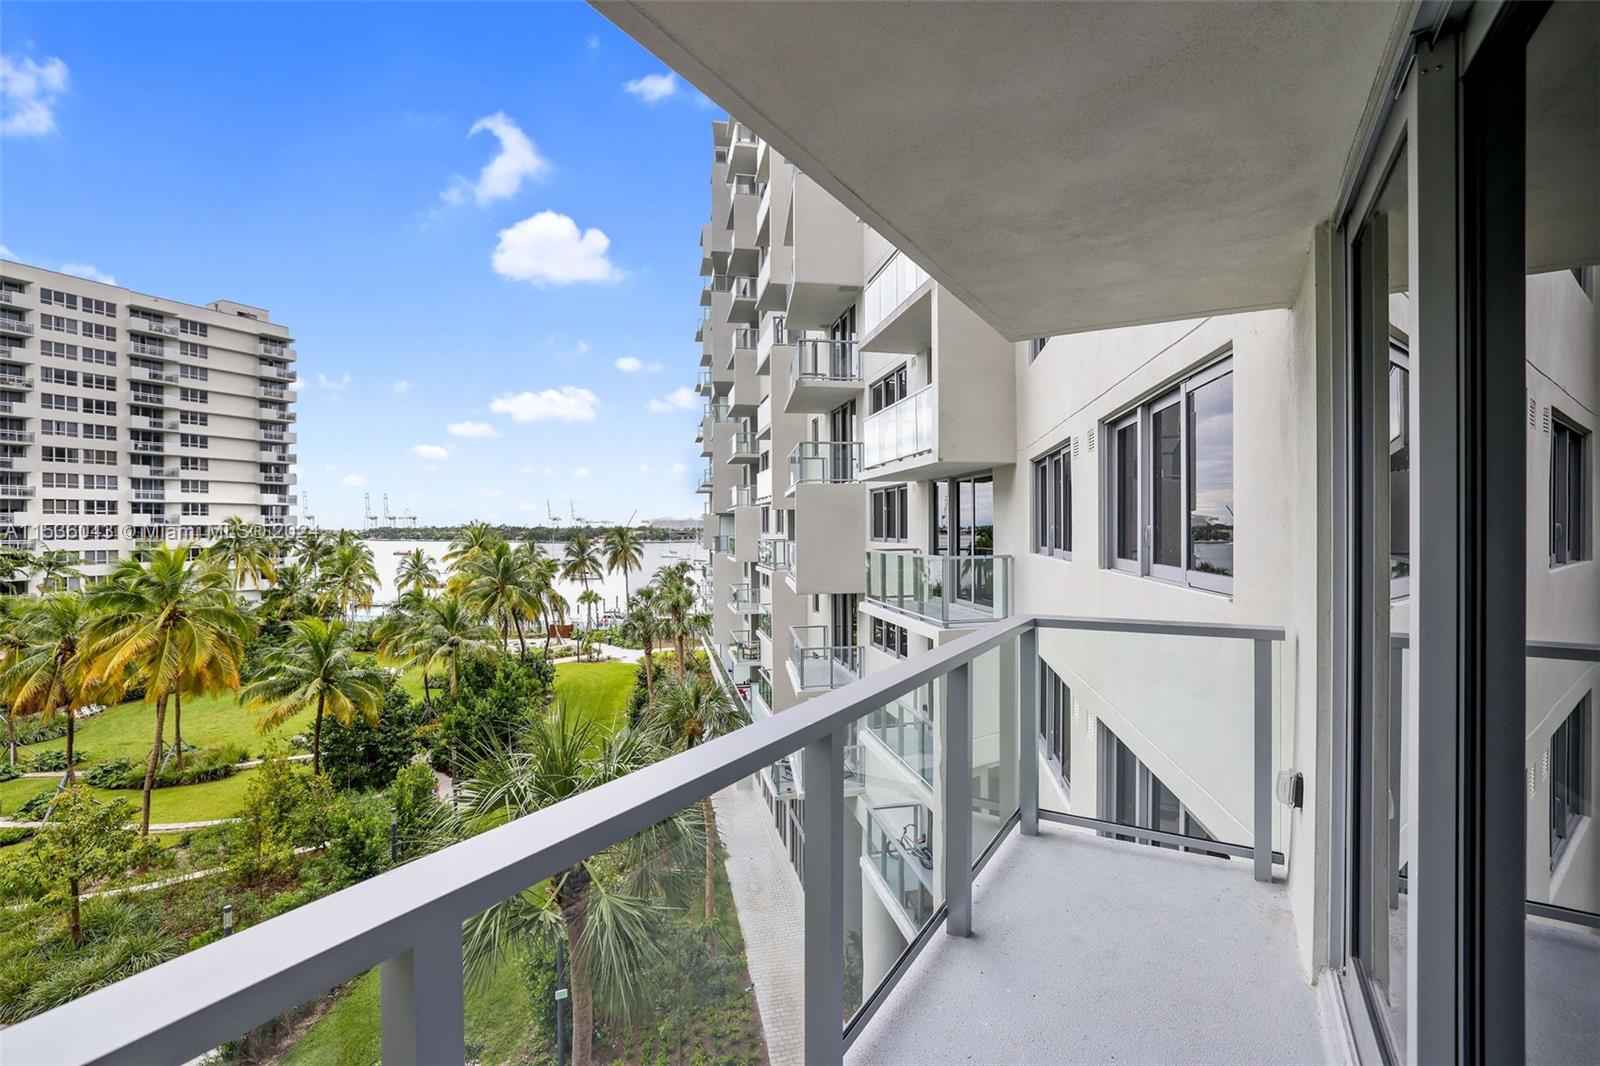 AVAILABLE 03/16. Photos may be from the exact unit on the same line but on another floor. Welcome to Flamingo Point Miami Beach's most exciting rental community. This newly renovated unit features hardwood floors, modern kitchen & baths w/SS appliances & granite counter tops. Amenities include fitness center, two resort style pools with private cabanas, BBQ area and much more. Move in costs are 1st month + $1500 deposit. Parking cost 1st vchl. $187 p/m. Pet Fee: $400+$50/m. *FAST APPROVAL! (NOTE: Rental rates are subject to change depending on move-in date and lease term. Advertised rate is best rate and maybe on leases longer than 12 months. Income must be greater than 3x one month's rent and minimum credit score of 620 in order to be approved).